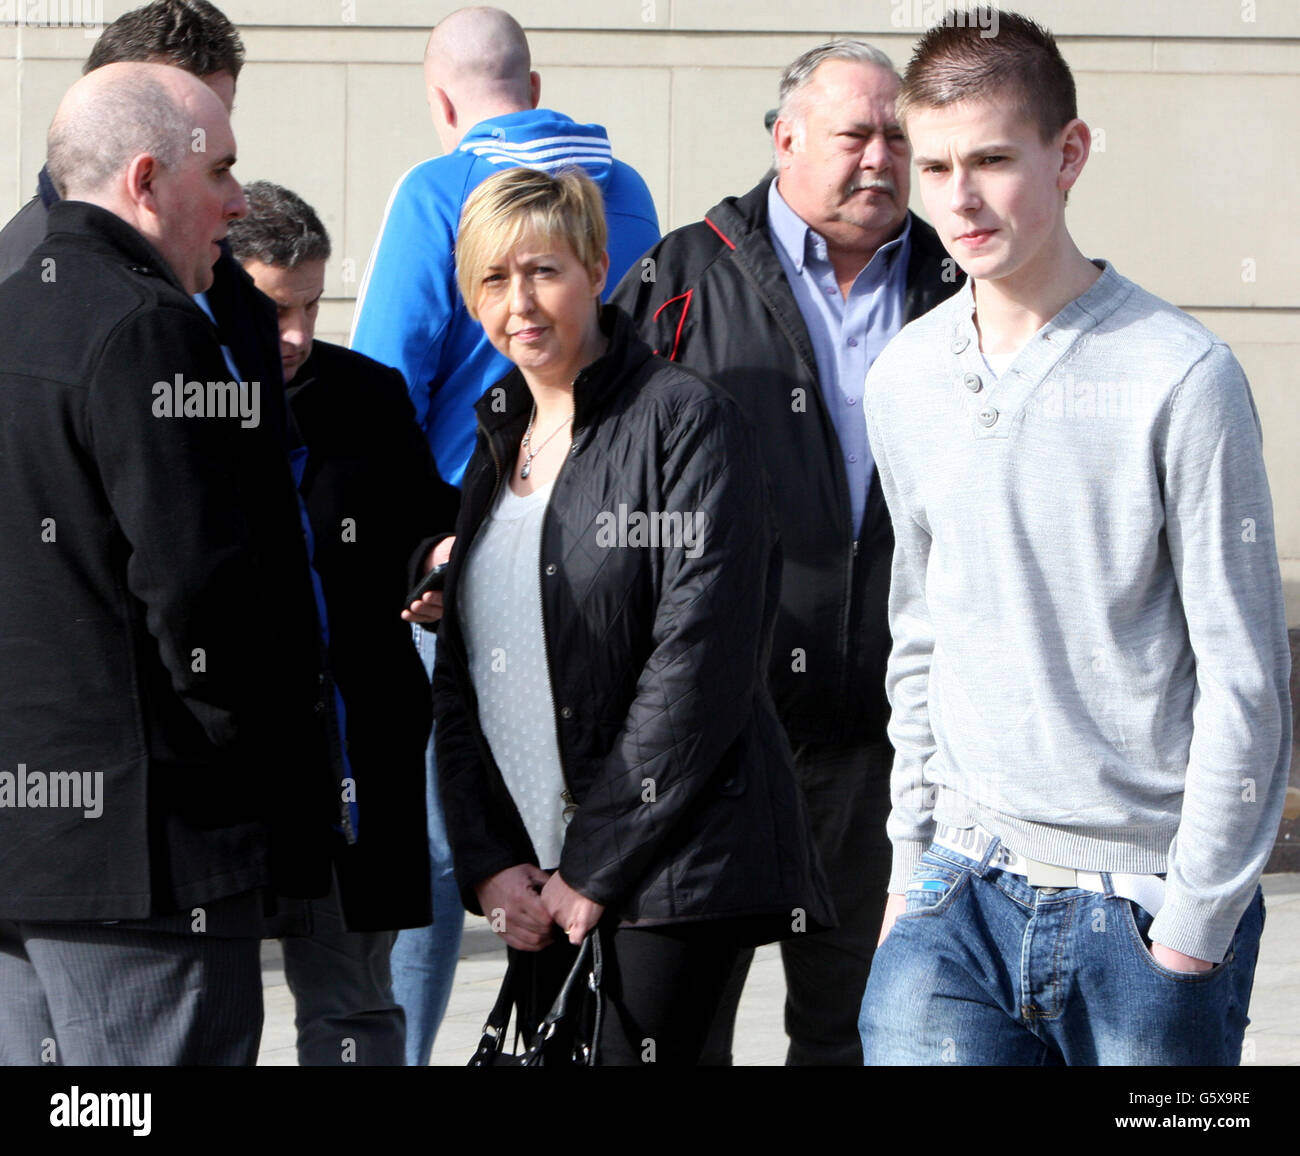 Ann Frazer, wife of Willie Frazer and their son Philip (right) outside Belfast's Magistrates Court as the prominent loyalist campaigner involved in Union flag protests in Northern Ireland has been refused bail after being accused of encouraging or assisting offences. Mr Frazer, 52, faces six charges linked to the ongoing demonstrations. Stock Photo